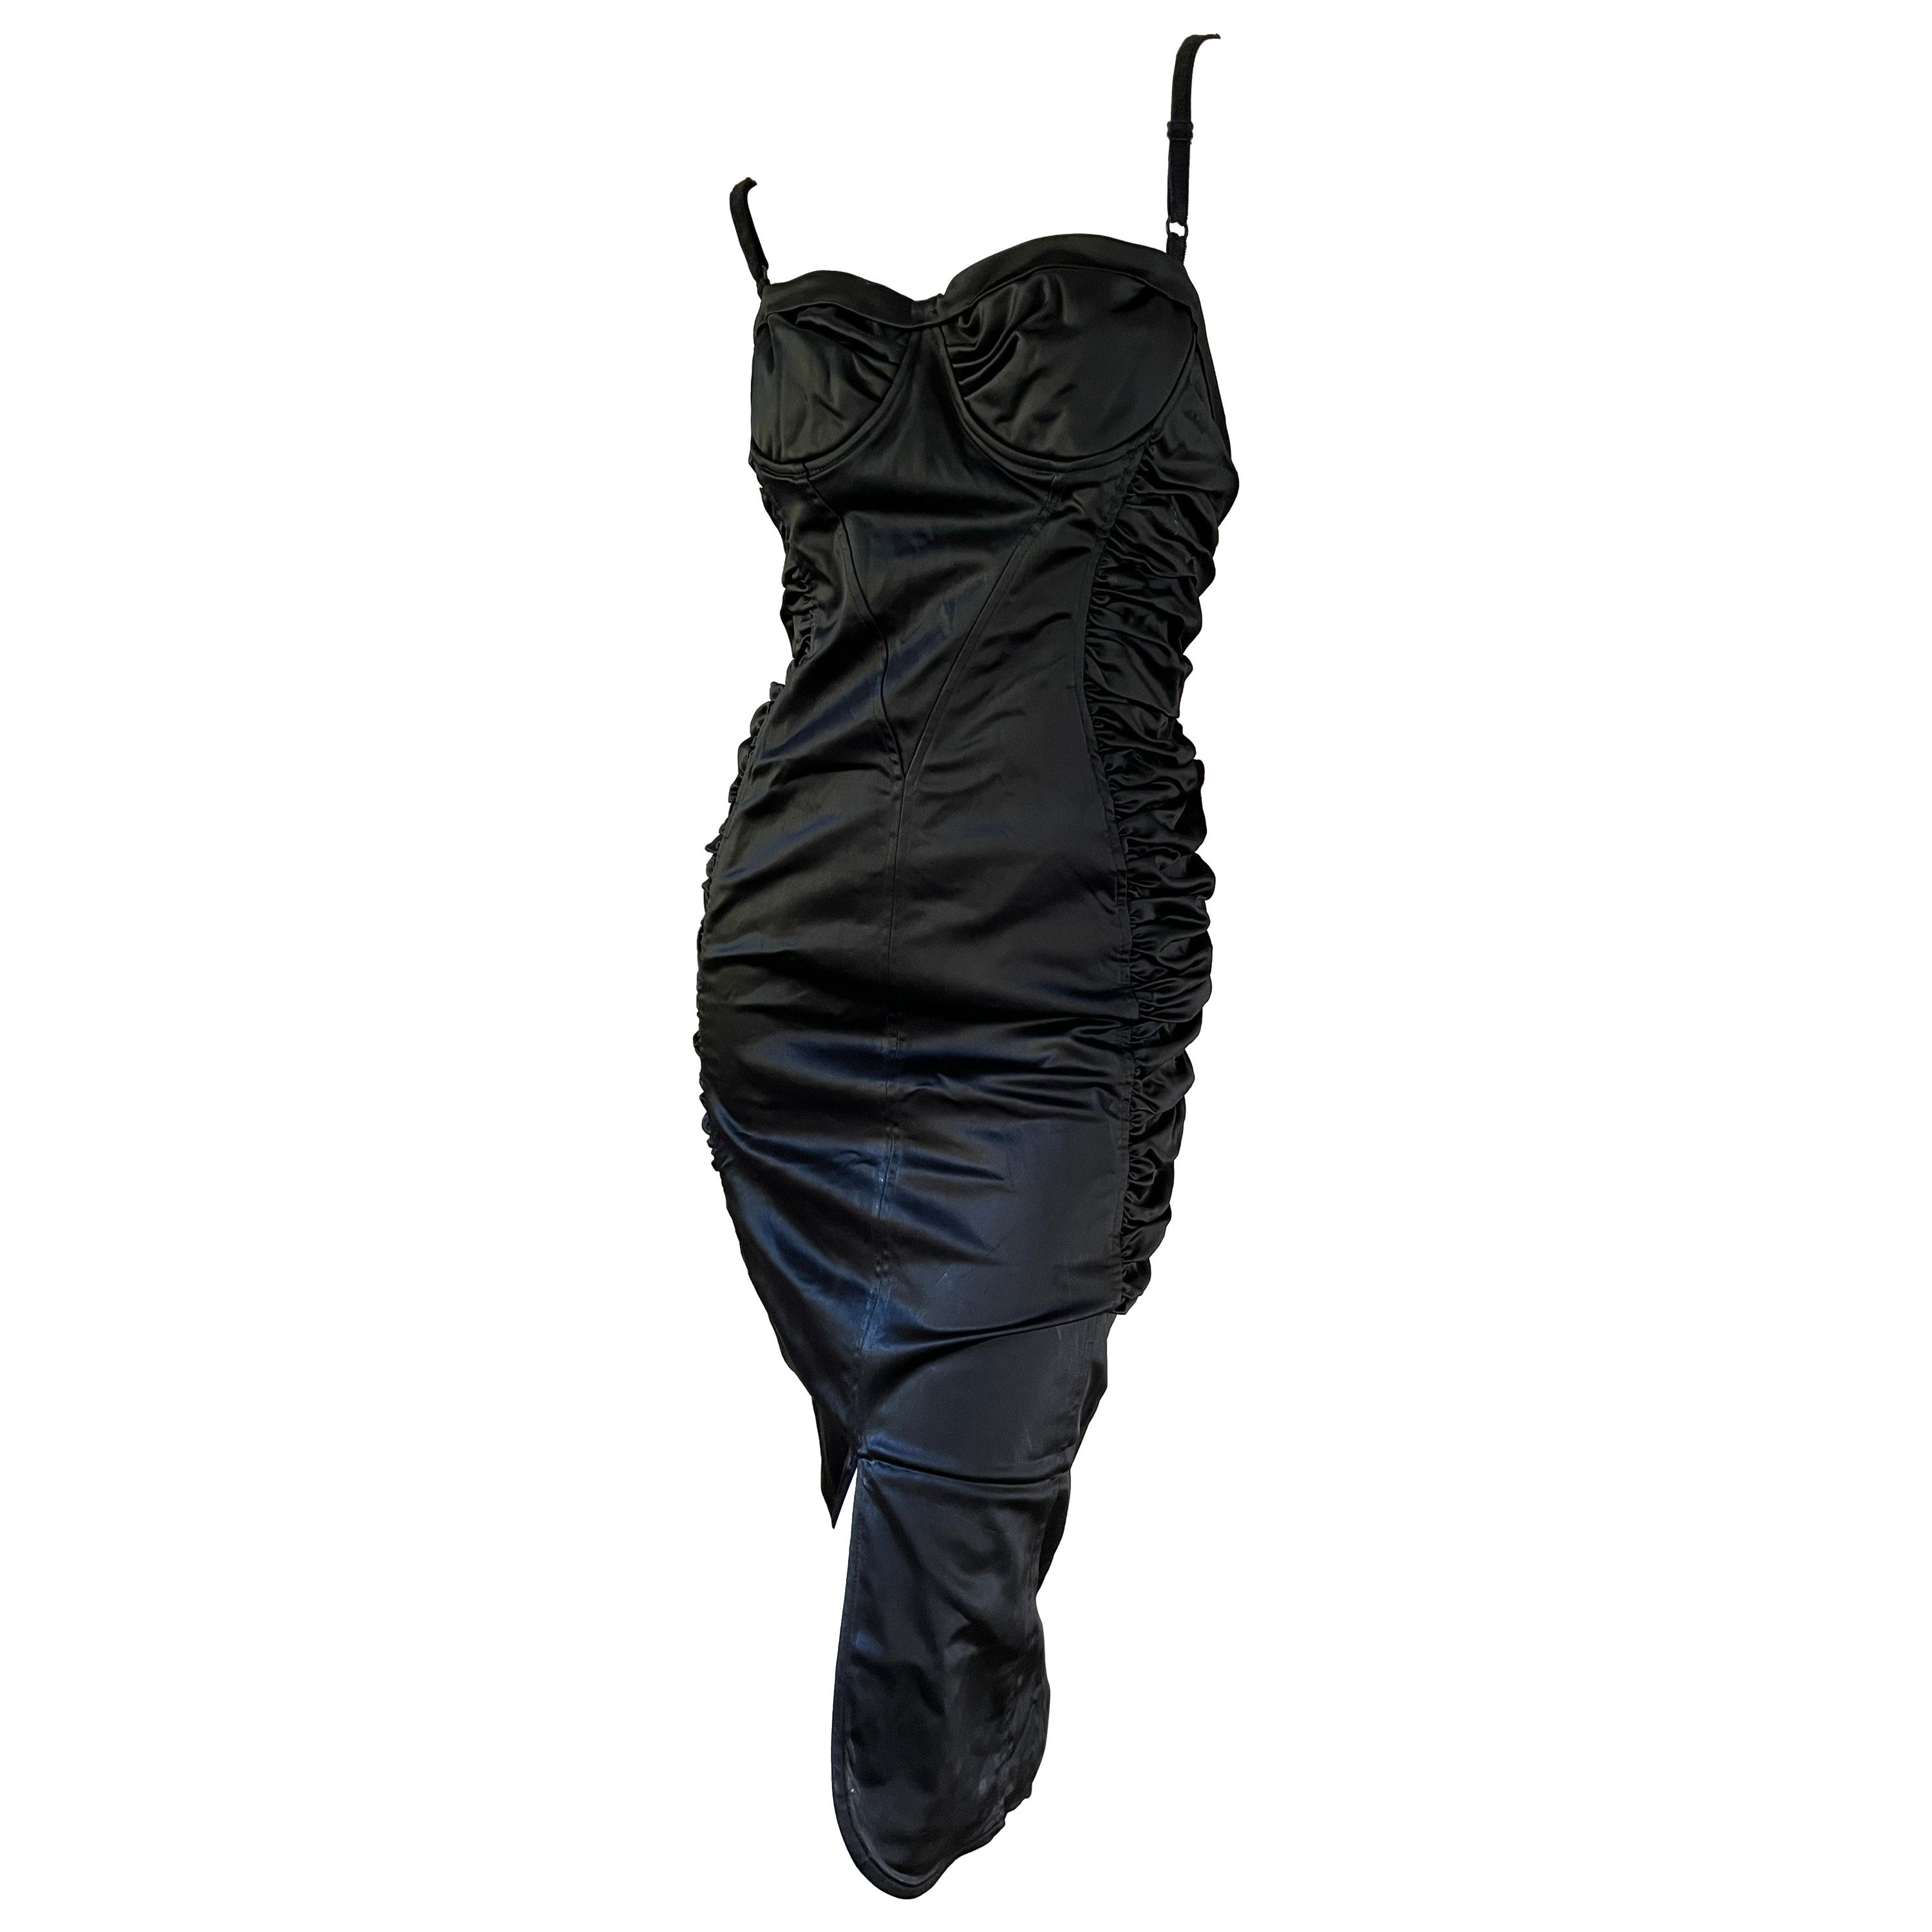 D&G by Dolce & Gabbana Vintage Black Ruched Cocktail Dress with Underwire Bra For Sale